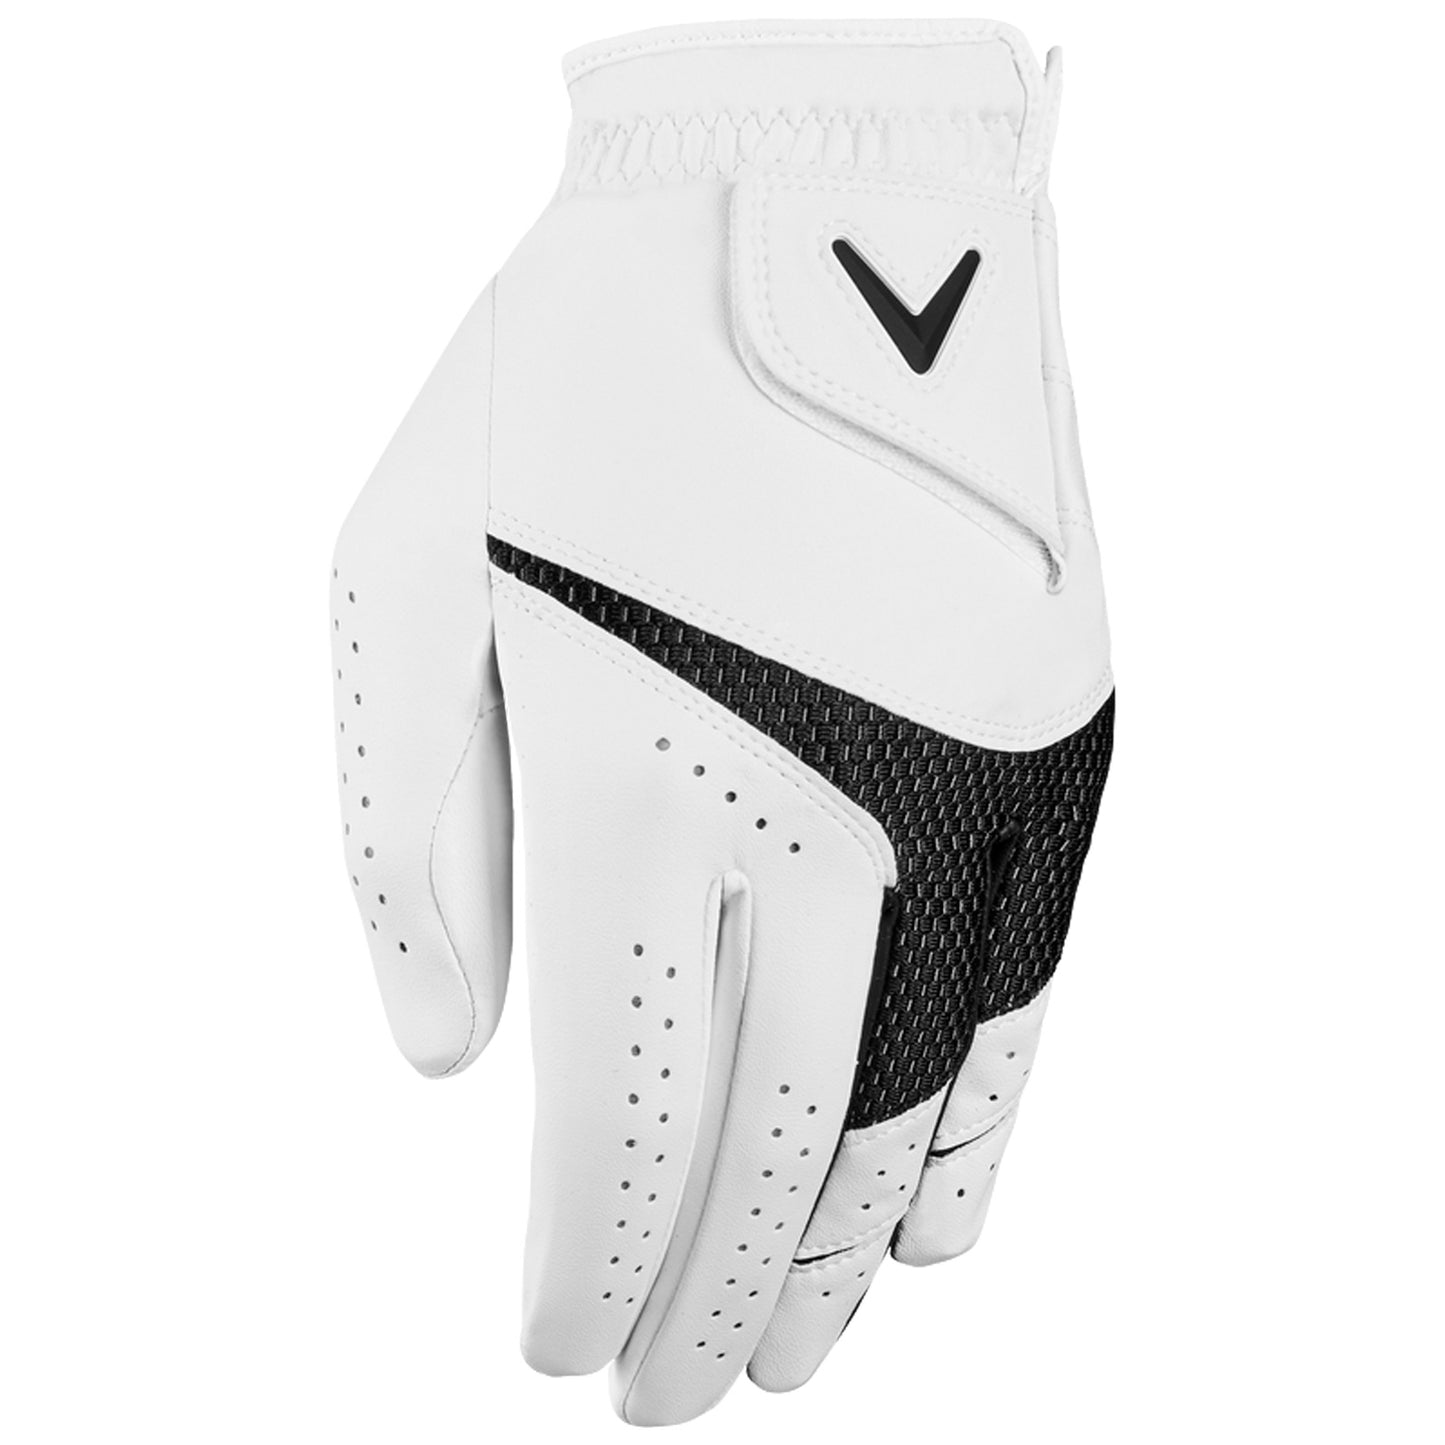 Callaway Mens Weather Spann RIGHT Hand Glove (2 Pack)